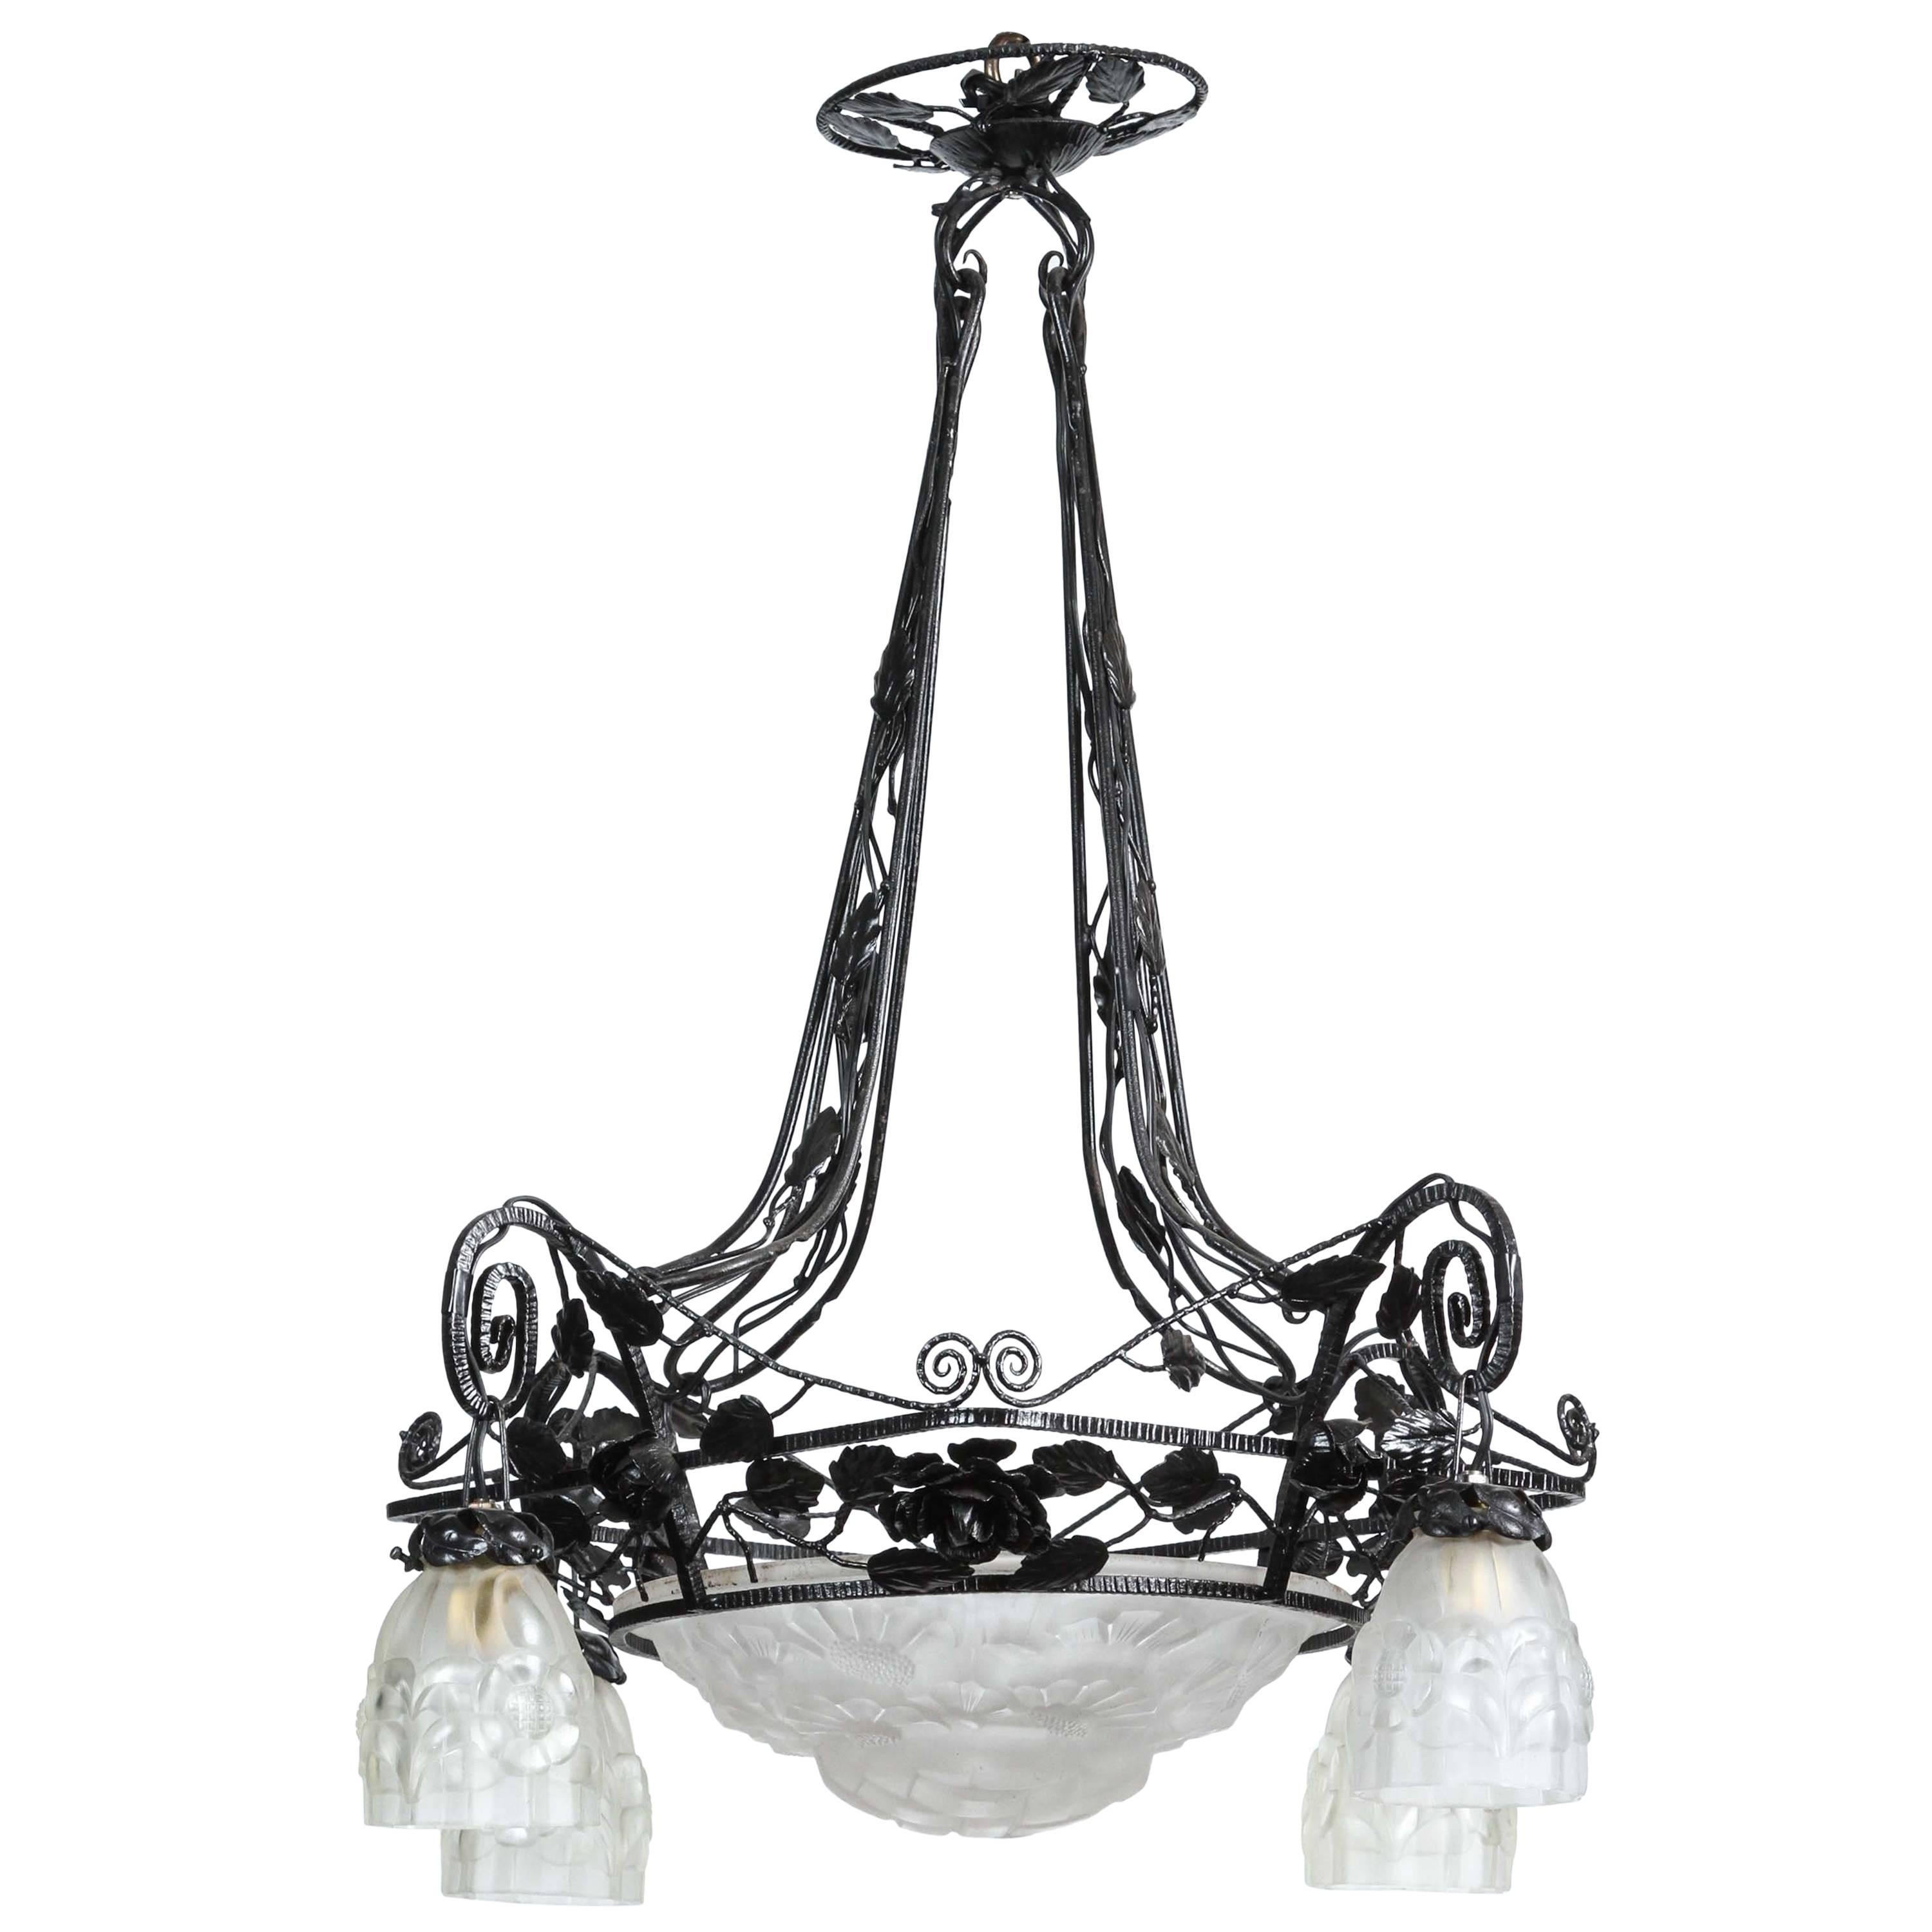 Wrought Iron Frosted Glass 4 Light Floral Chandelier